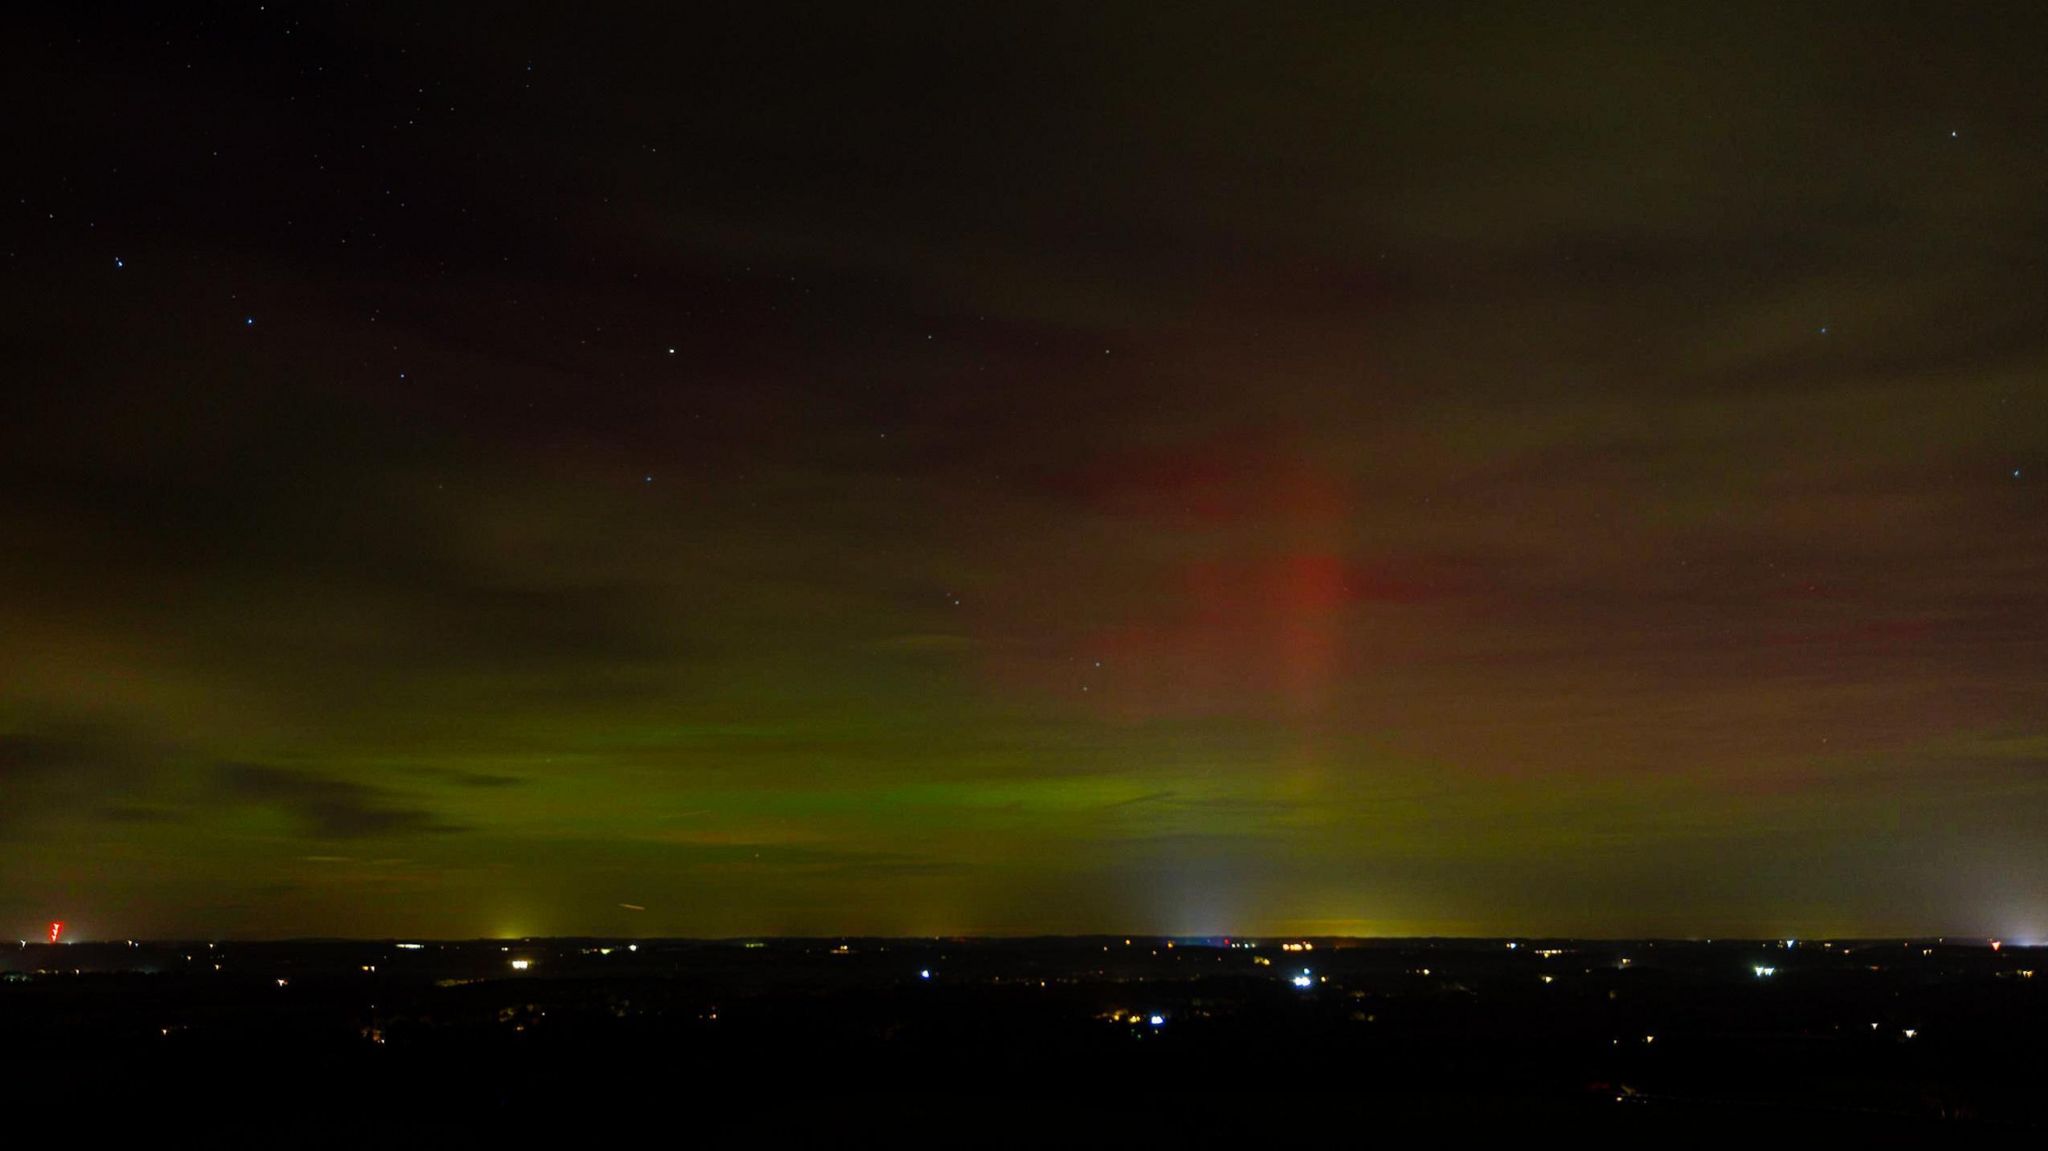 Northern lights spotted in Newbury